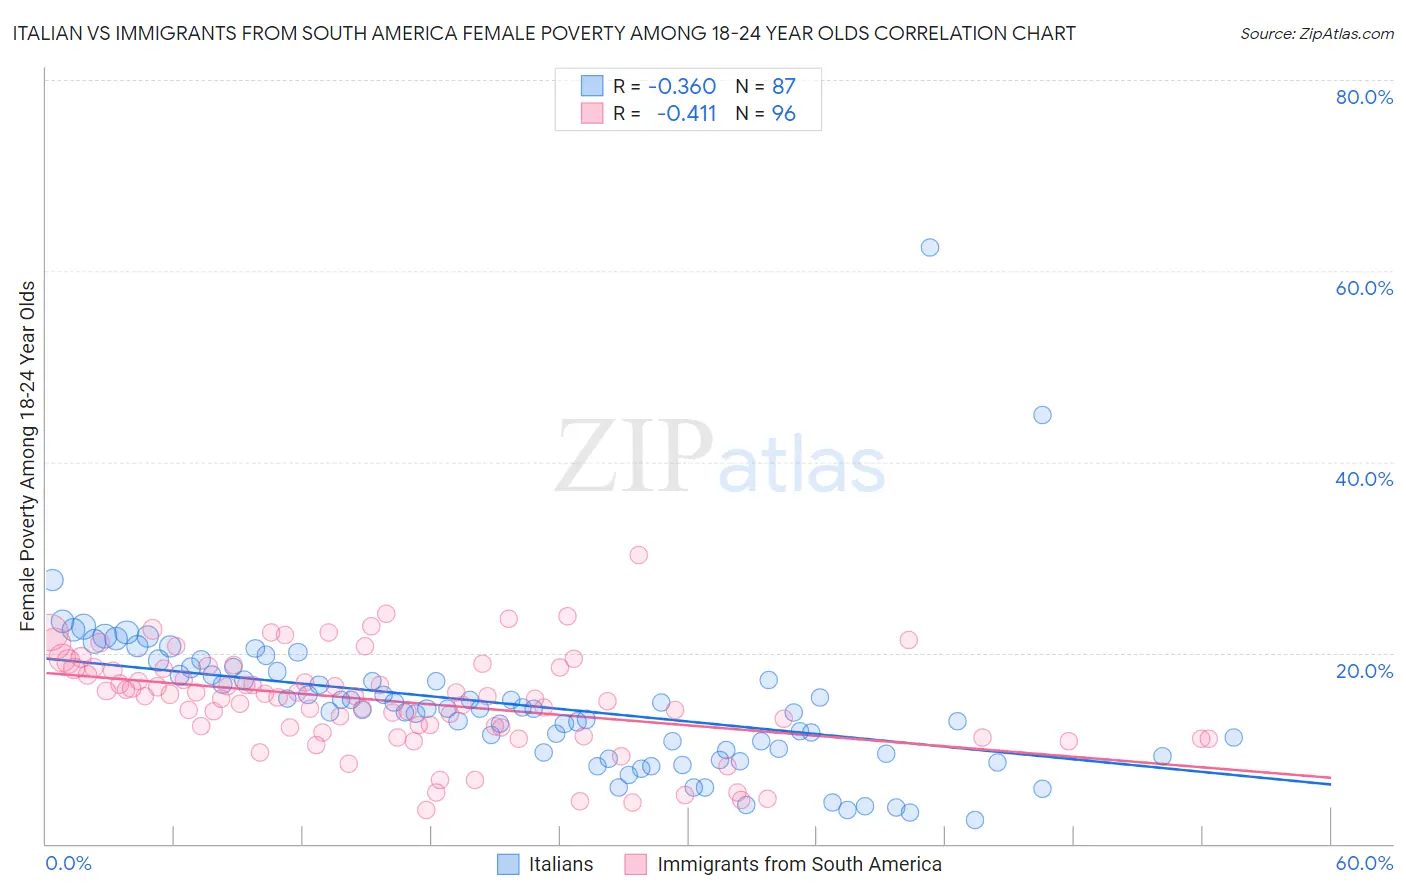 Italian vs Immigrants from South America Female Poverty Among 18-24 Year Olds